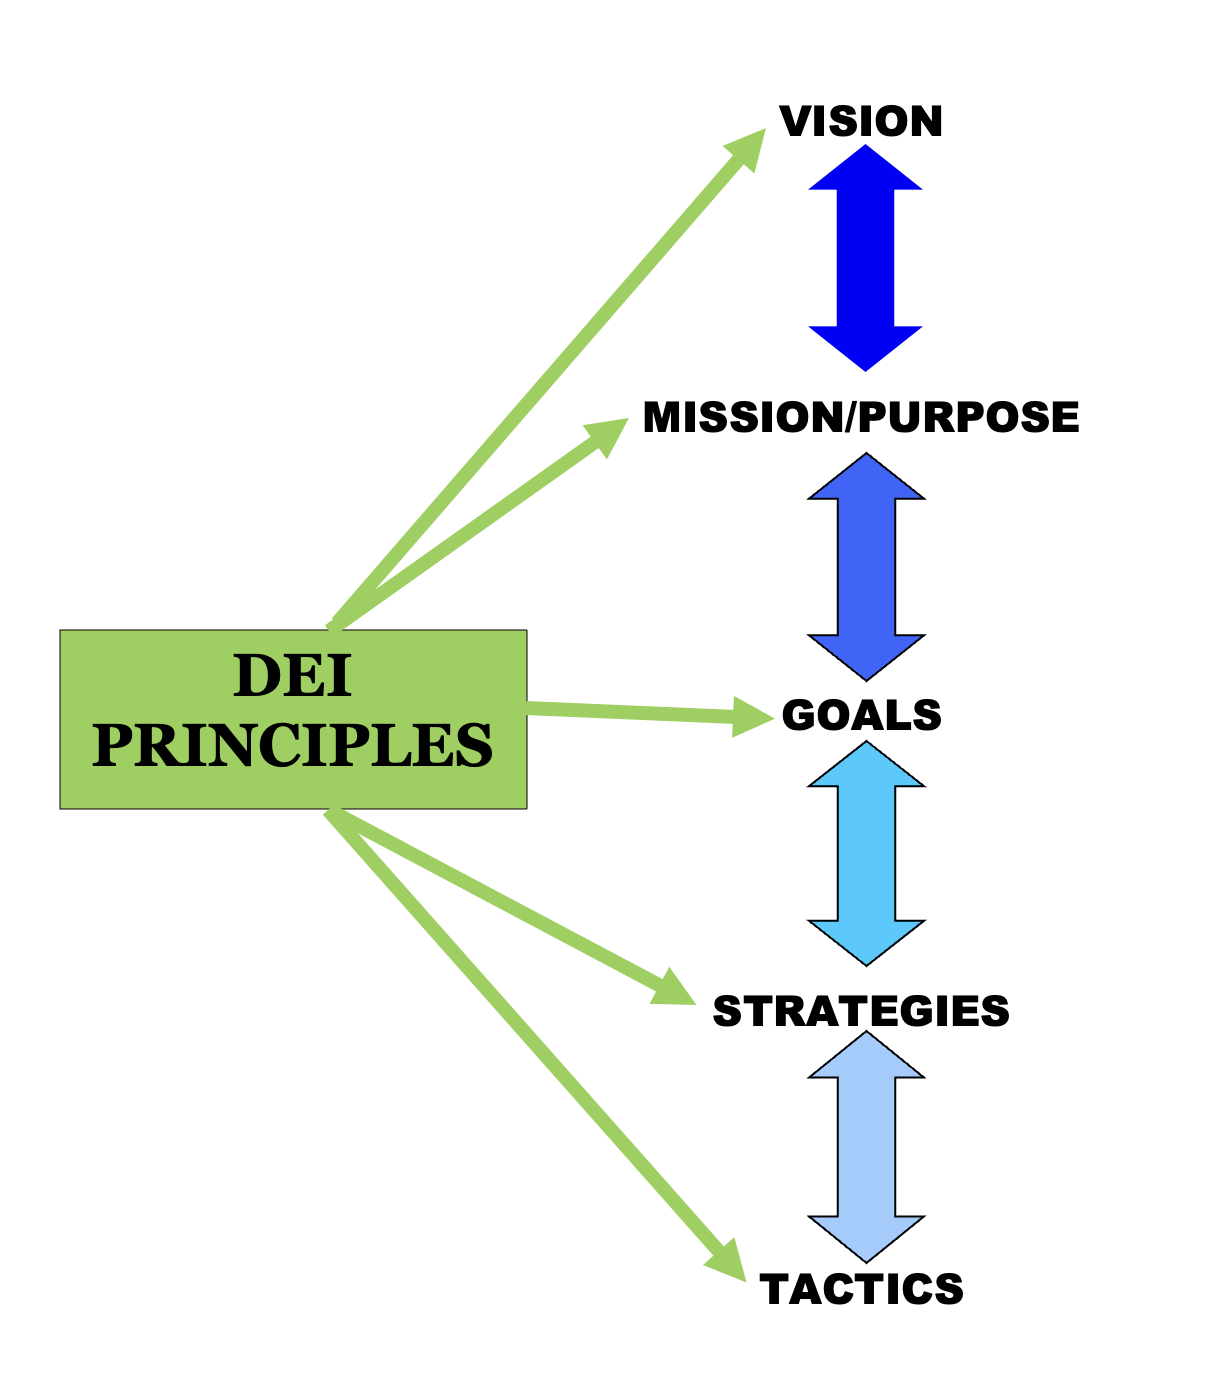 A diagram of a diagram of a mission purpose

Description automatically generated